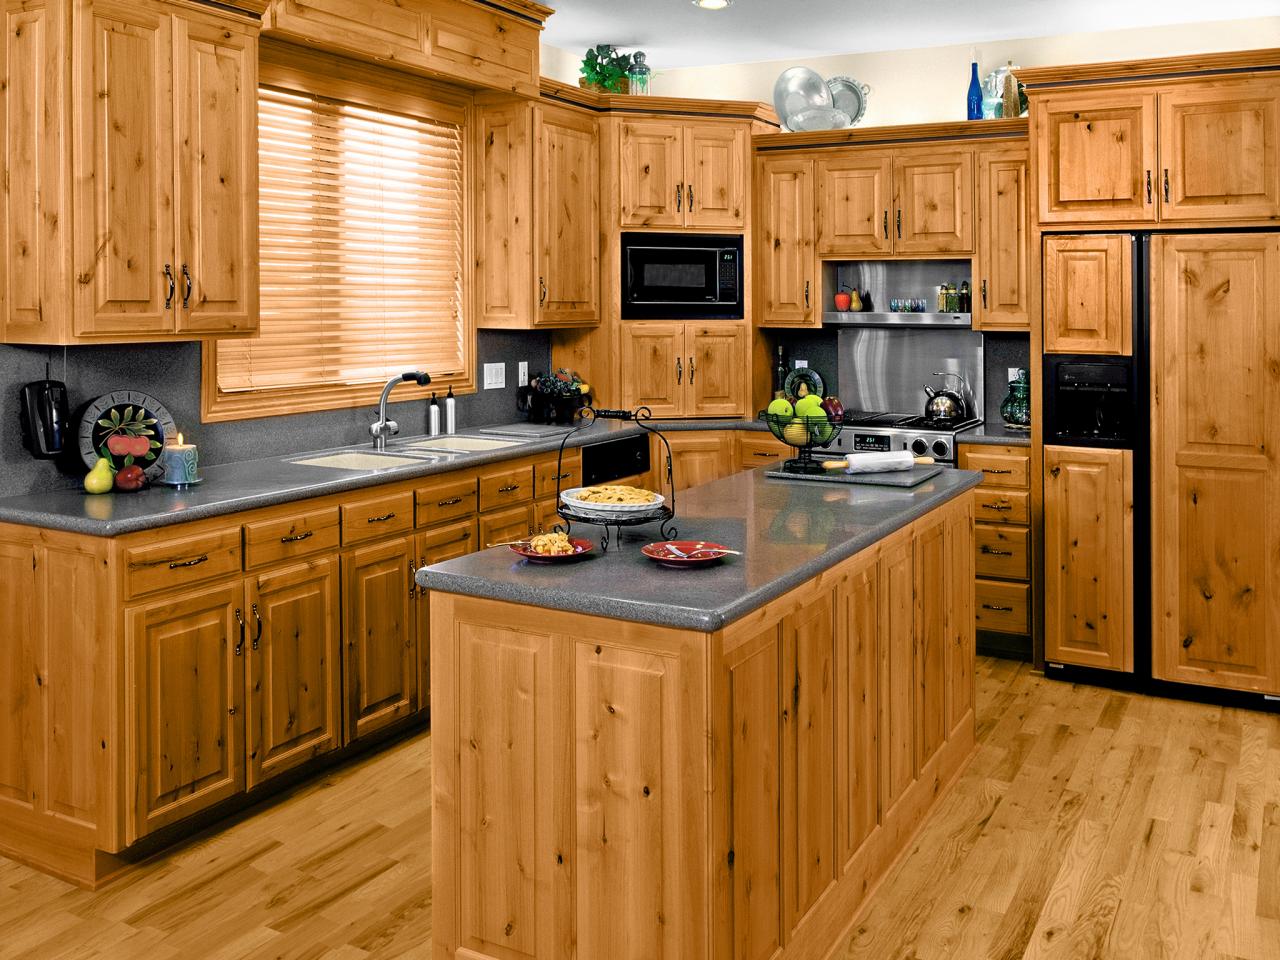 Pine Kitchen Cabinets: Pictures, Options, Tips & Ideas | HGTV